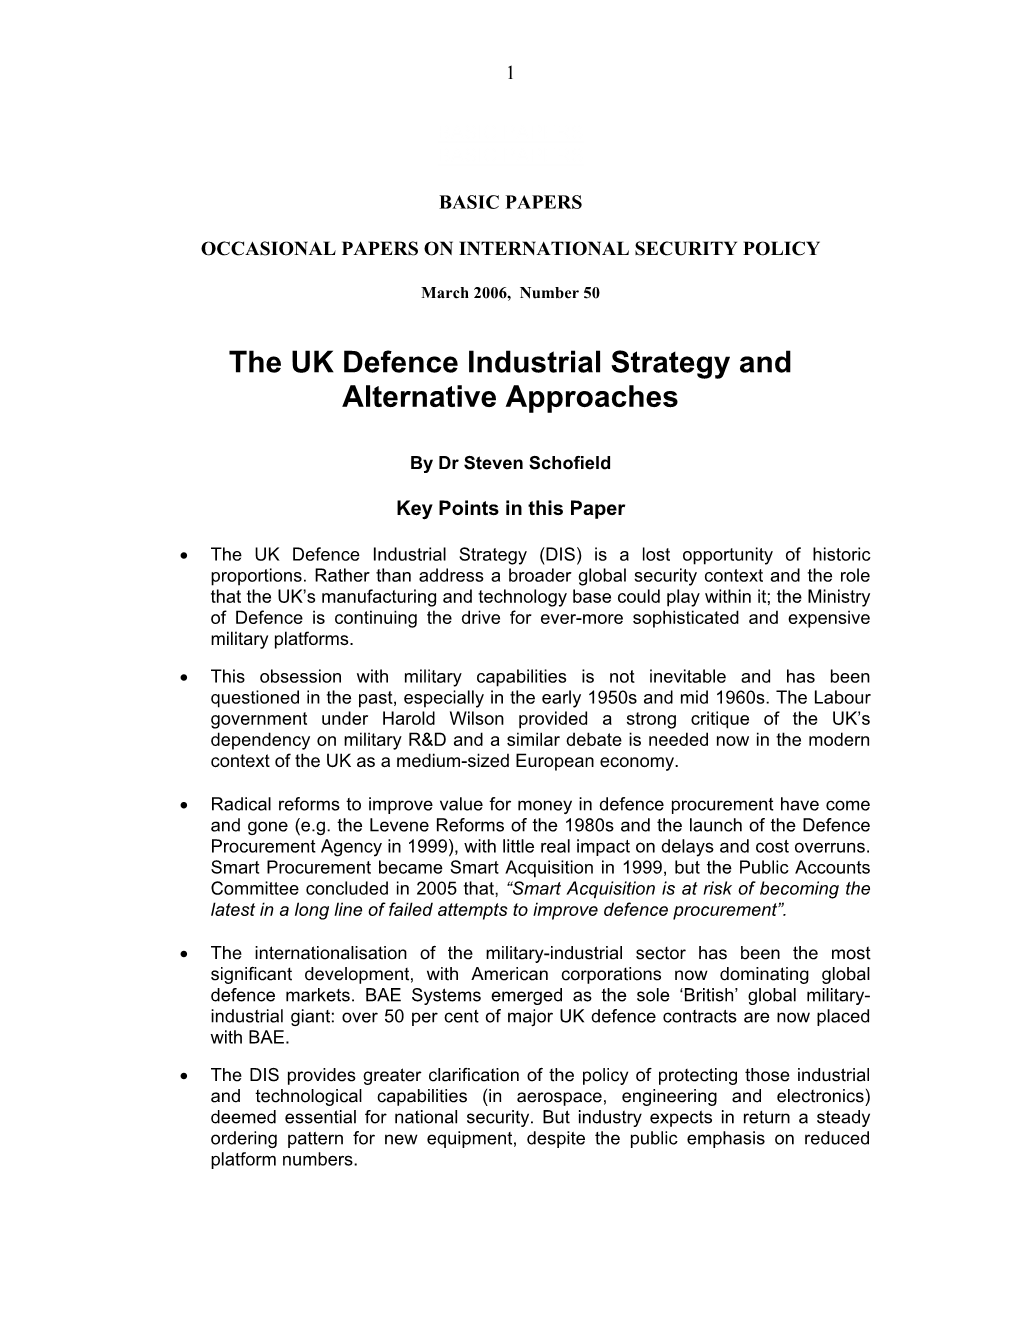 The UK Defence Industrial Strategy and Alternative Approaches